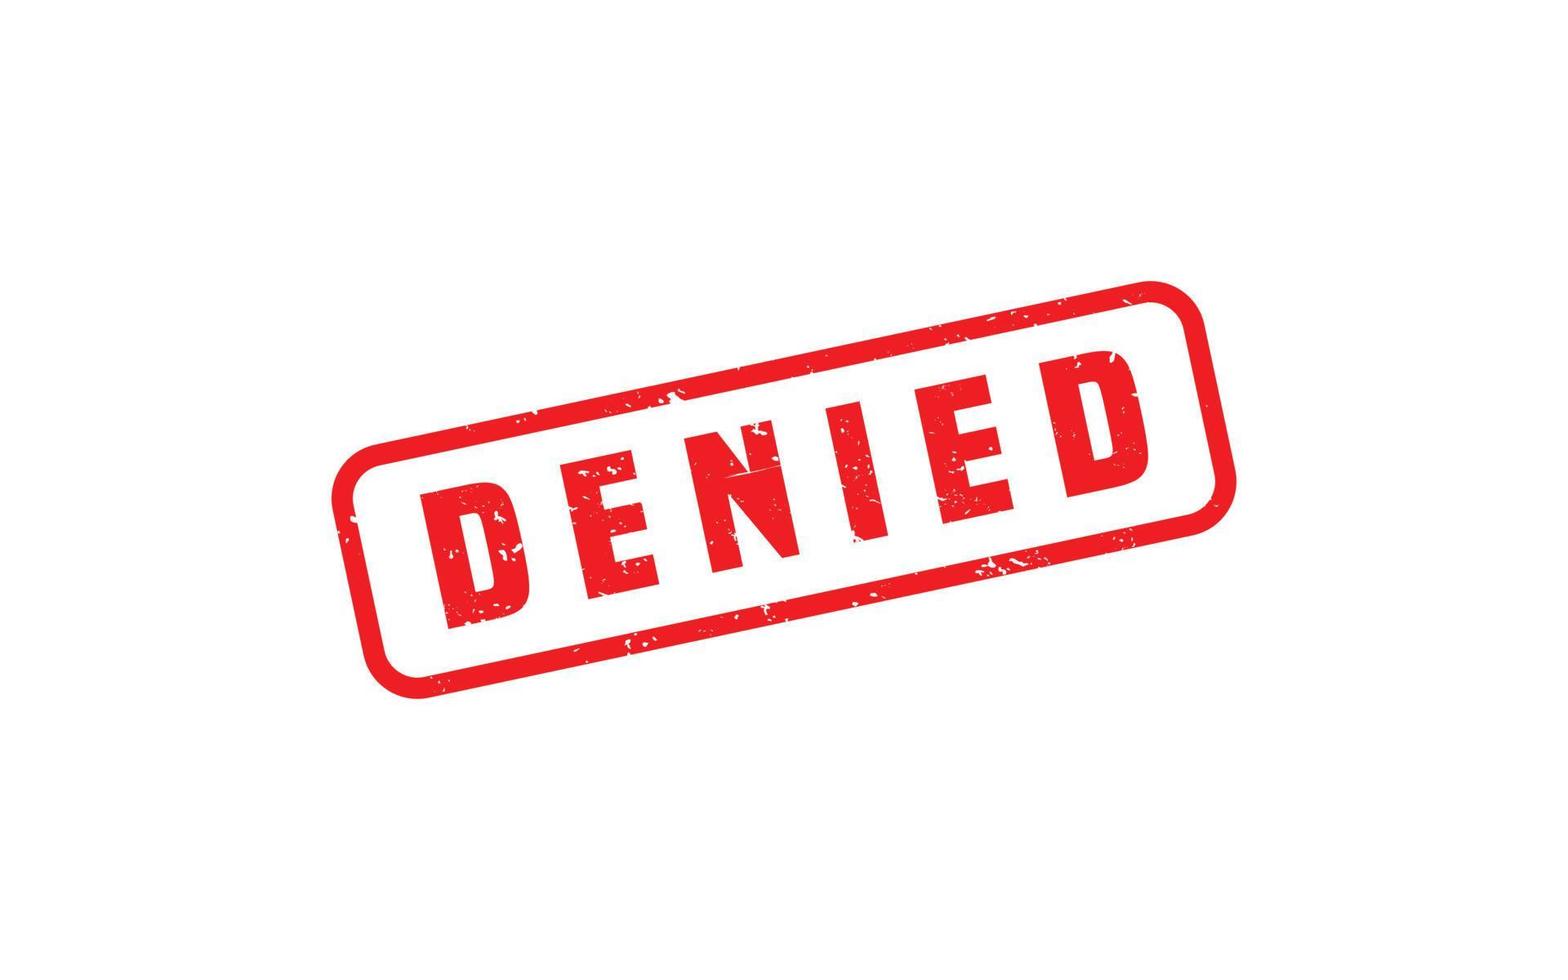 DENIED stamp rubber with grunge style on white background vector